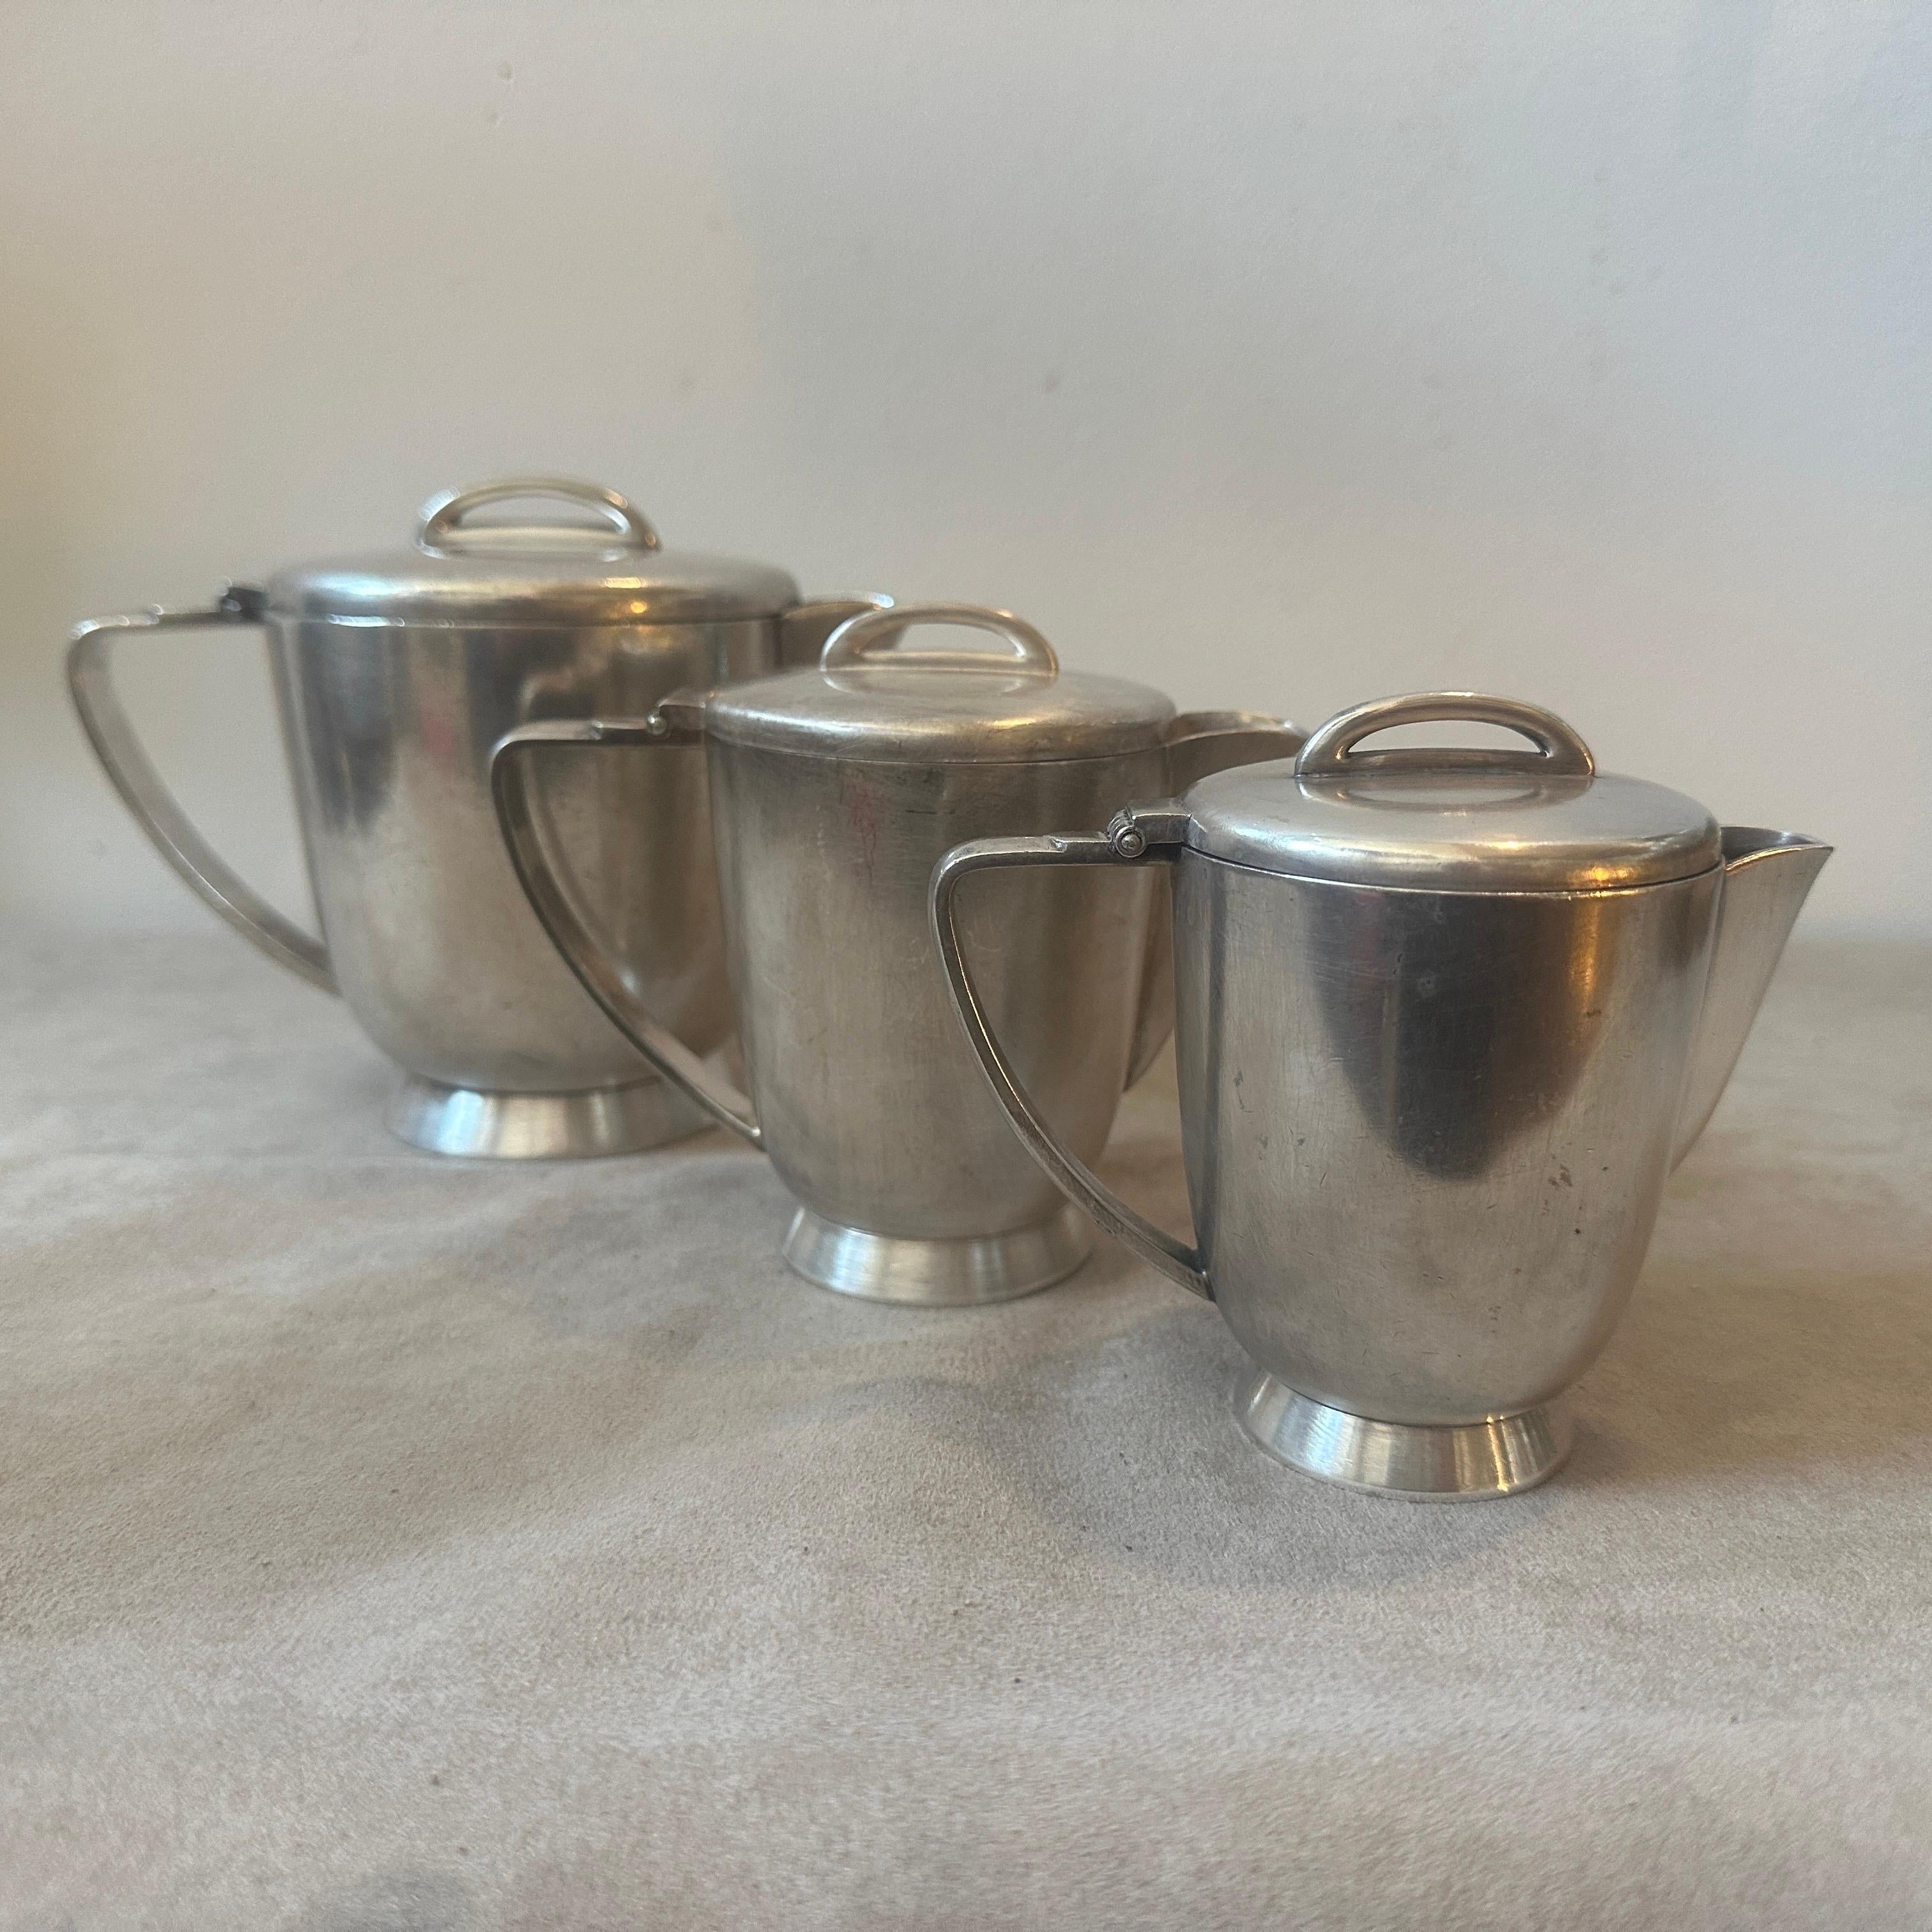 A set of three alpaca coffee pot designed by Gio Ponti and manufactured by Fratelli Calderoni in the Fifties, they were used in the hotels and they are marked on the bottom Calderoni, they are in original conditions with normal signs of use and age.